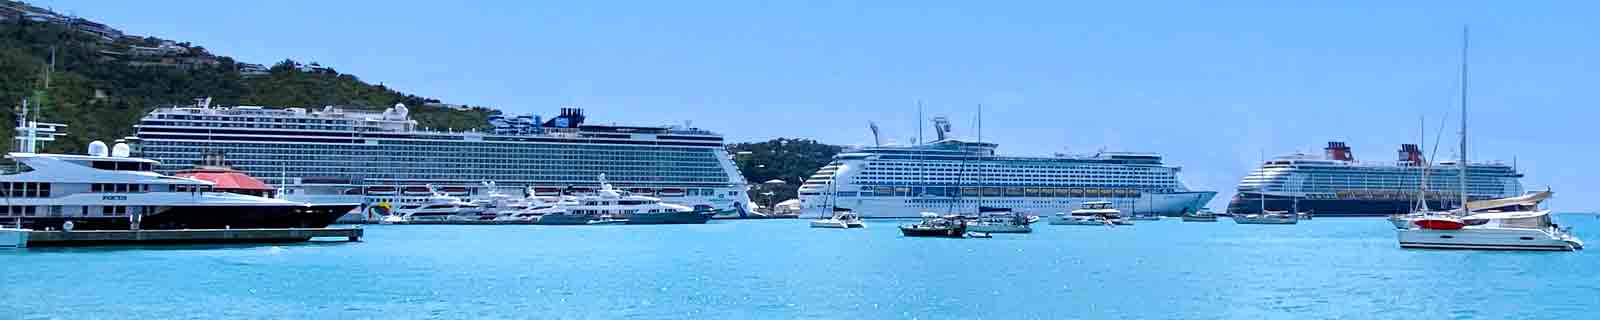 Photo by IQCruising of cruise ships docked in the Havensight Dock in St Thomas (USVI) cruise port